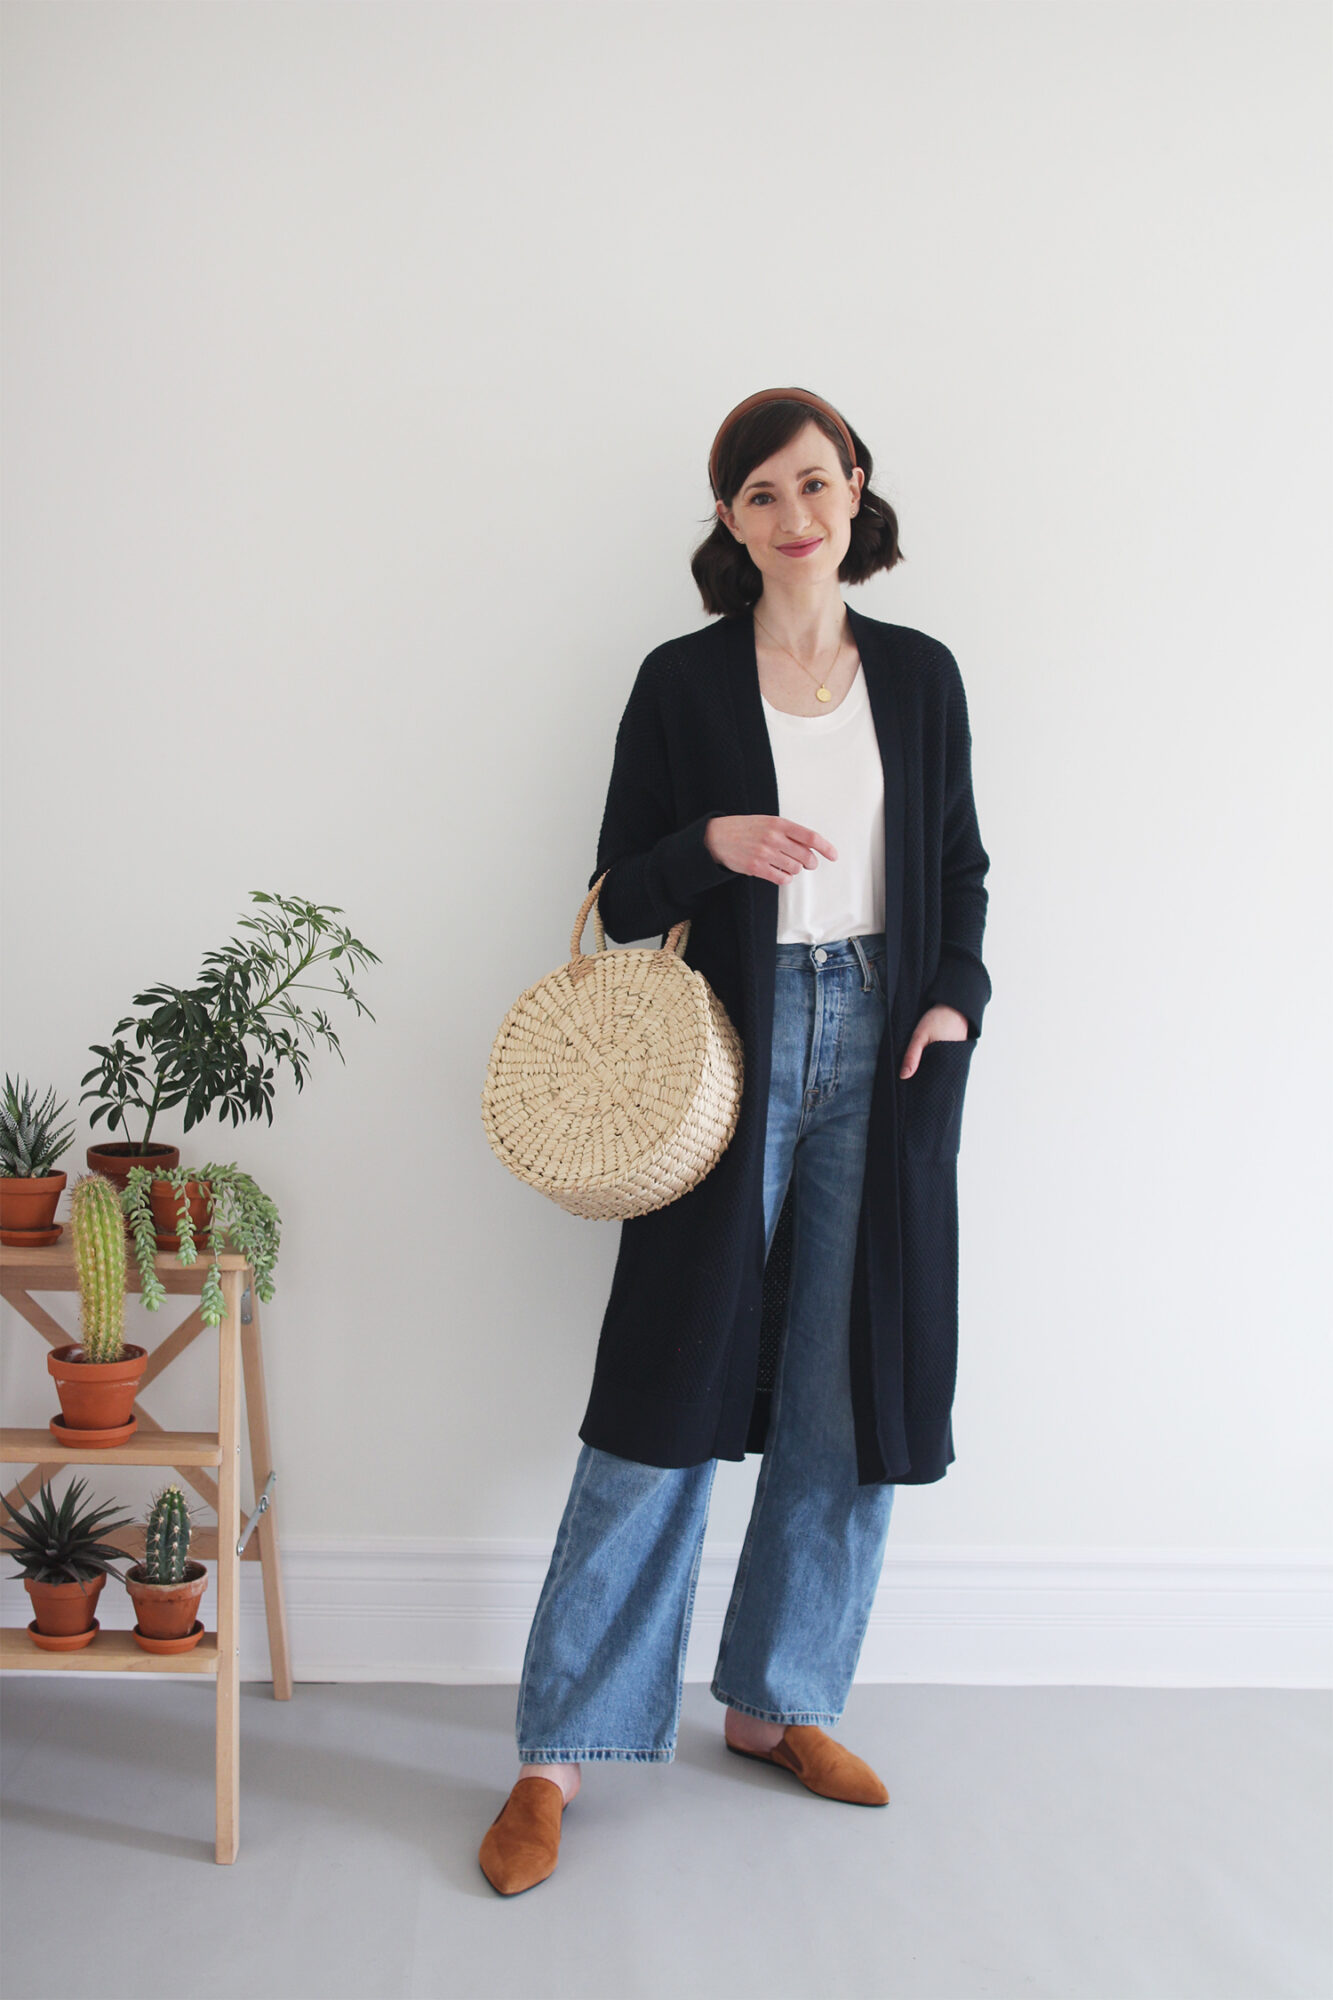 How to wear a cardigan with skinny jeans - Quora